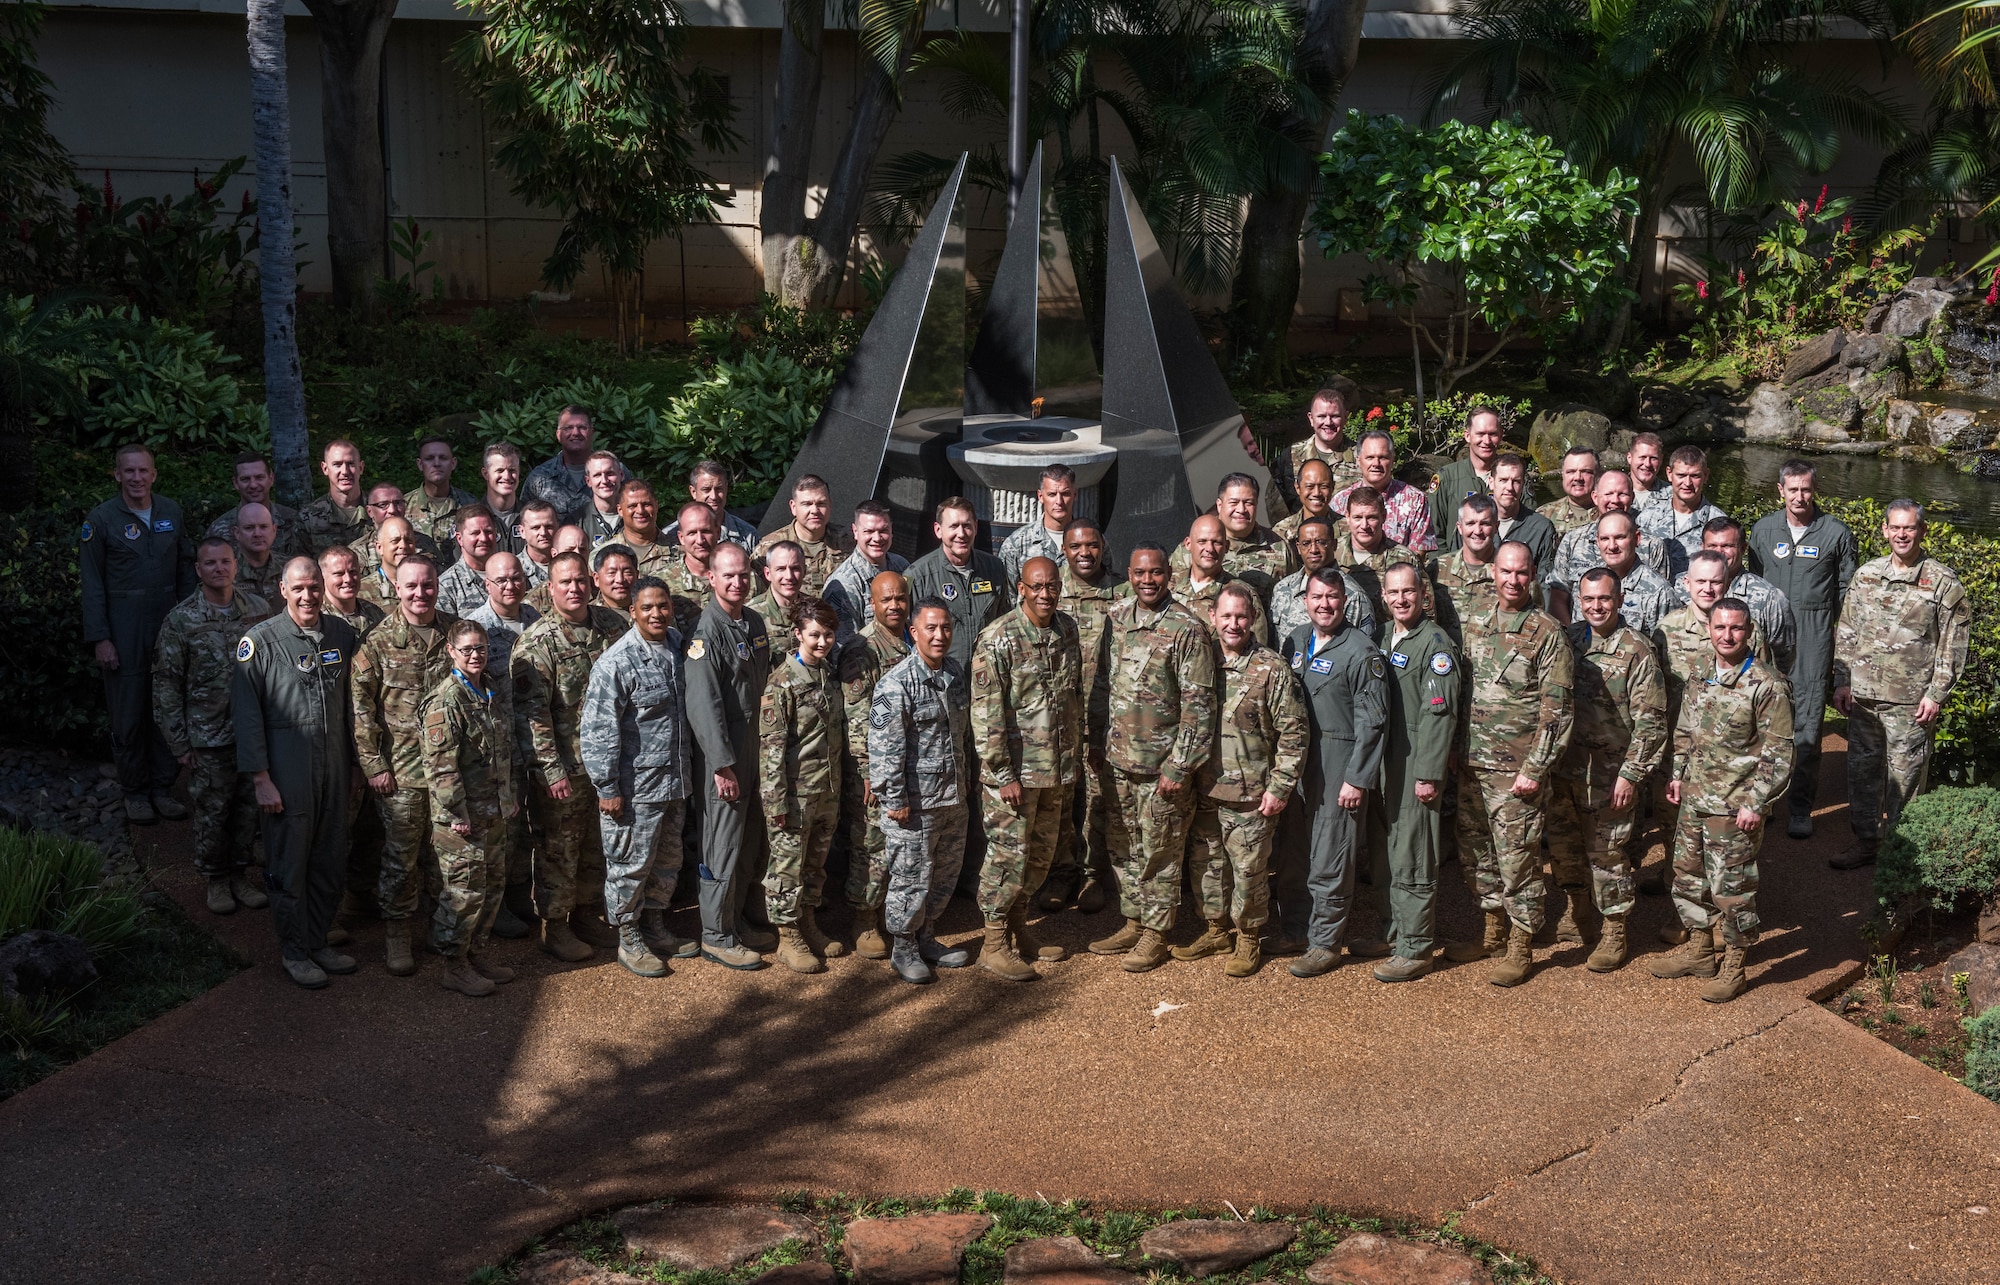 Commanders, Command Chiefs and Directors from across the Pacific Air Forces area of responsibility pose for a photo in the Courtyard of Heroes during the spring commander’s conference at Joint Base Pearl Harbor-Hickam, Hawaii, 18 April 2019. The commander’s conference gave attendees the chance to discuss challenges and opportunities to succeed in an era of great power competition. (U.S. Air Force Photo by Staff Sgt. Hailey Haux)